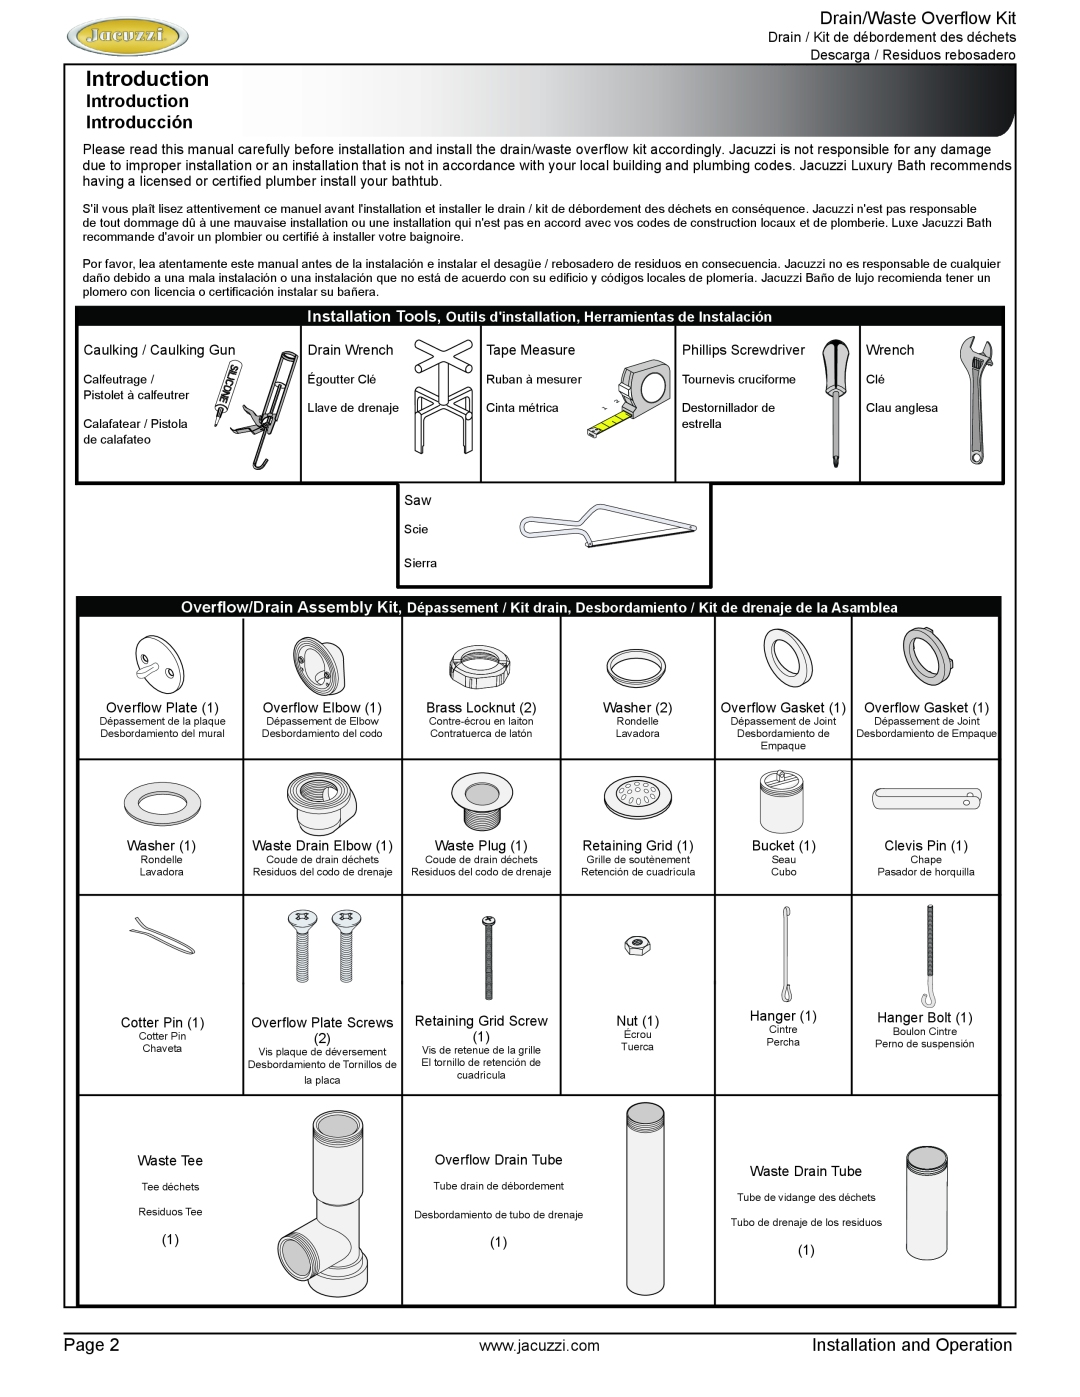 Jacuzzi HJ78000 installation instructions Introduction, Drain/Waste Overflow Kit, Page, Installation and Operation 